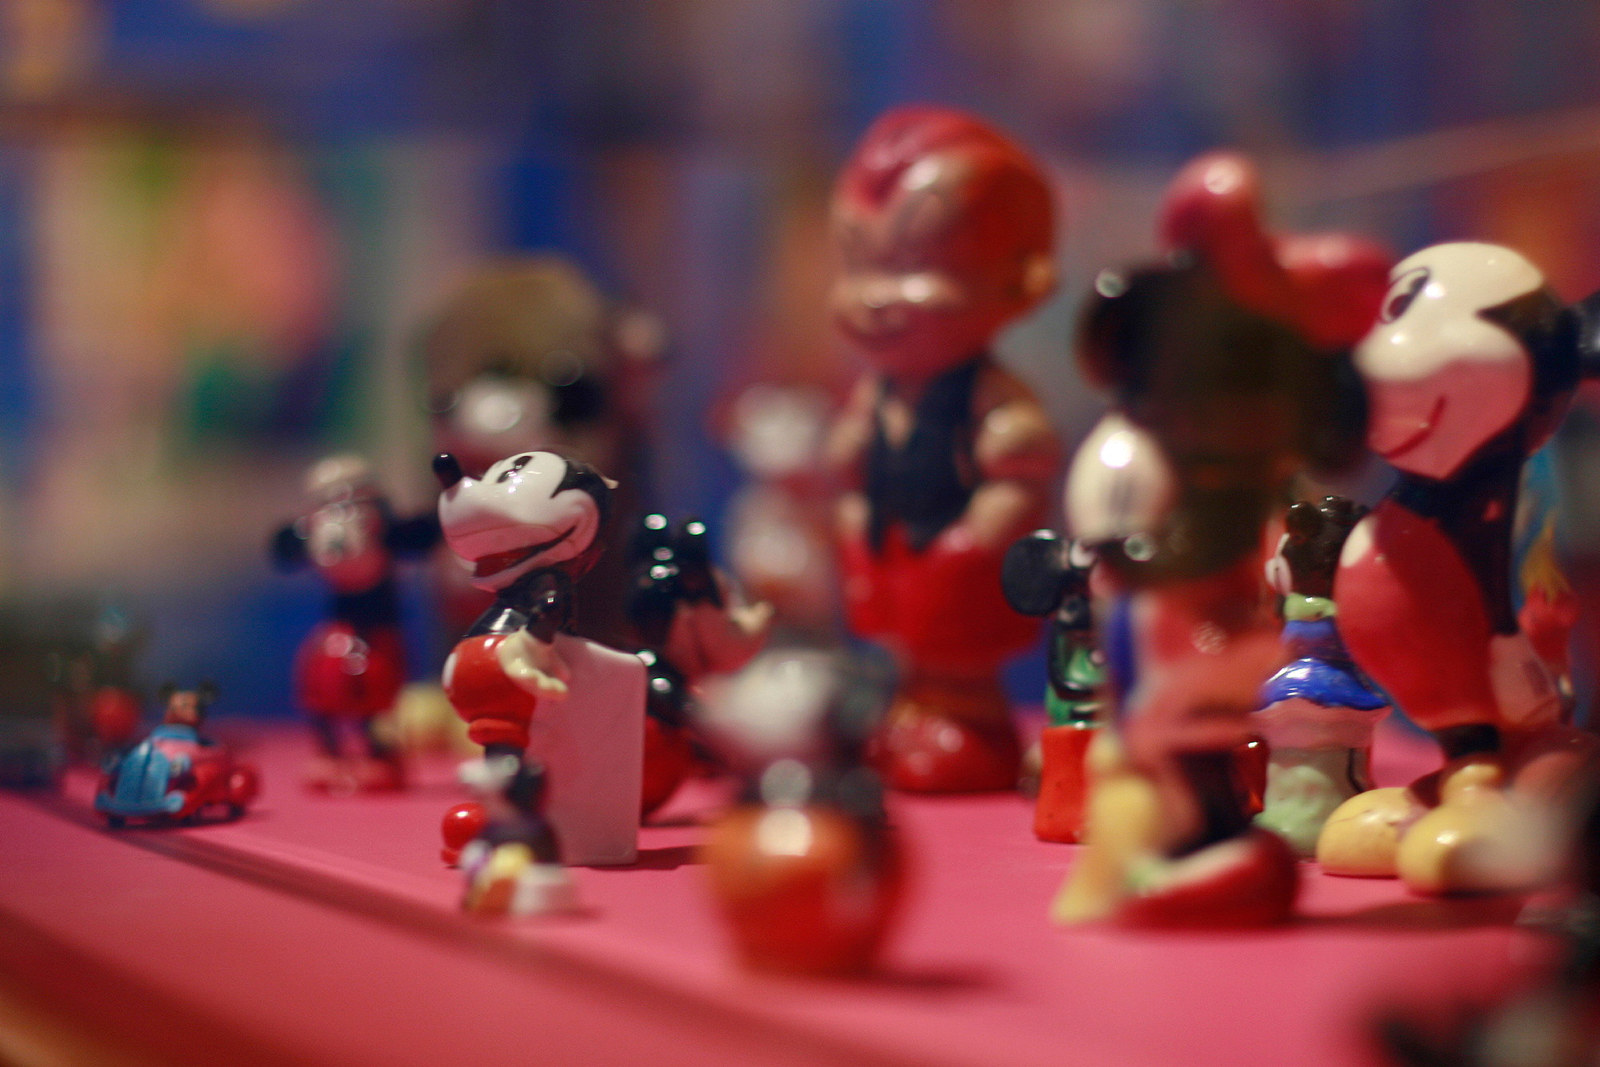 Figurines from the exhibition at the Martin Sharp Launch